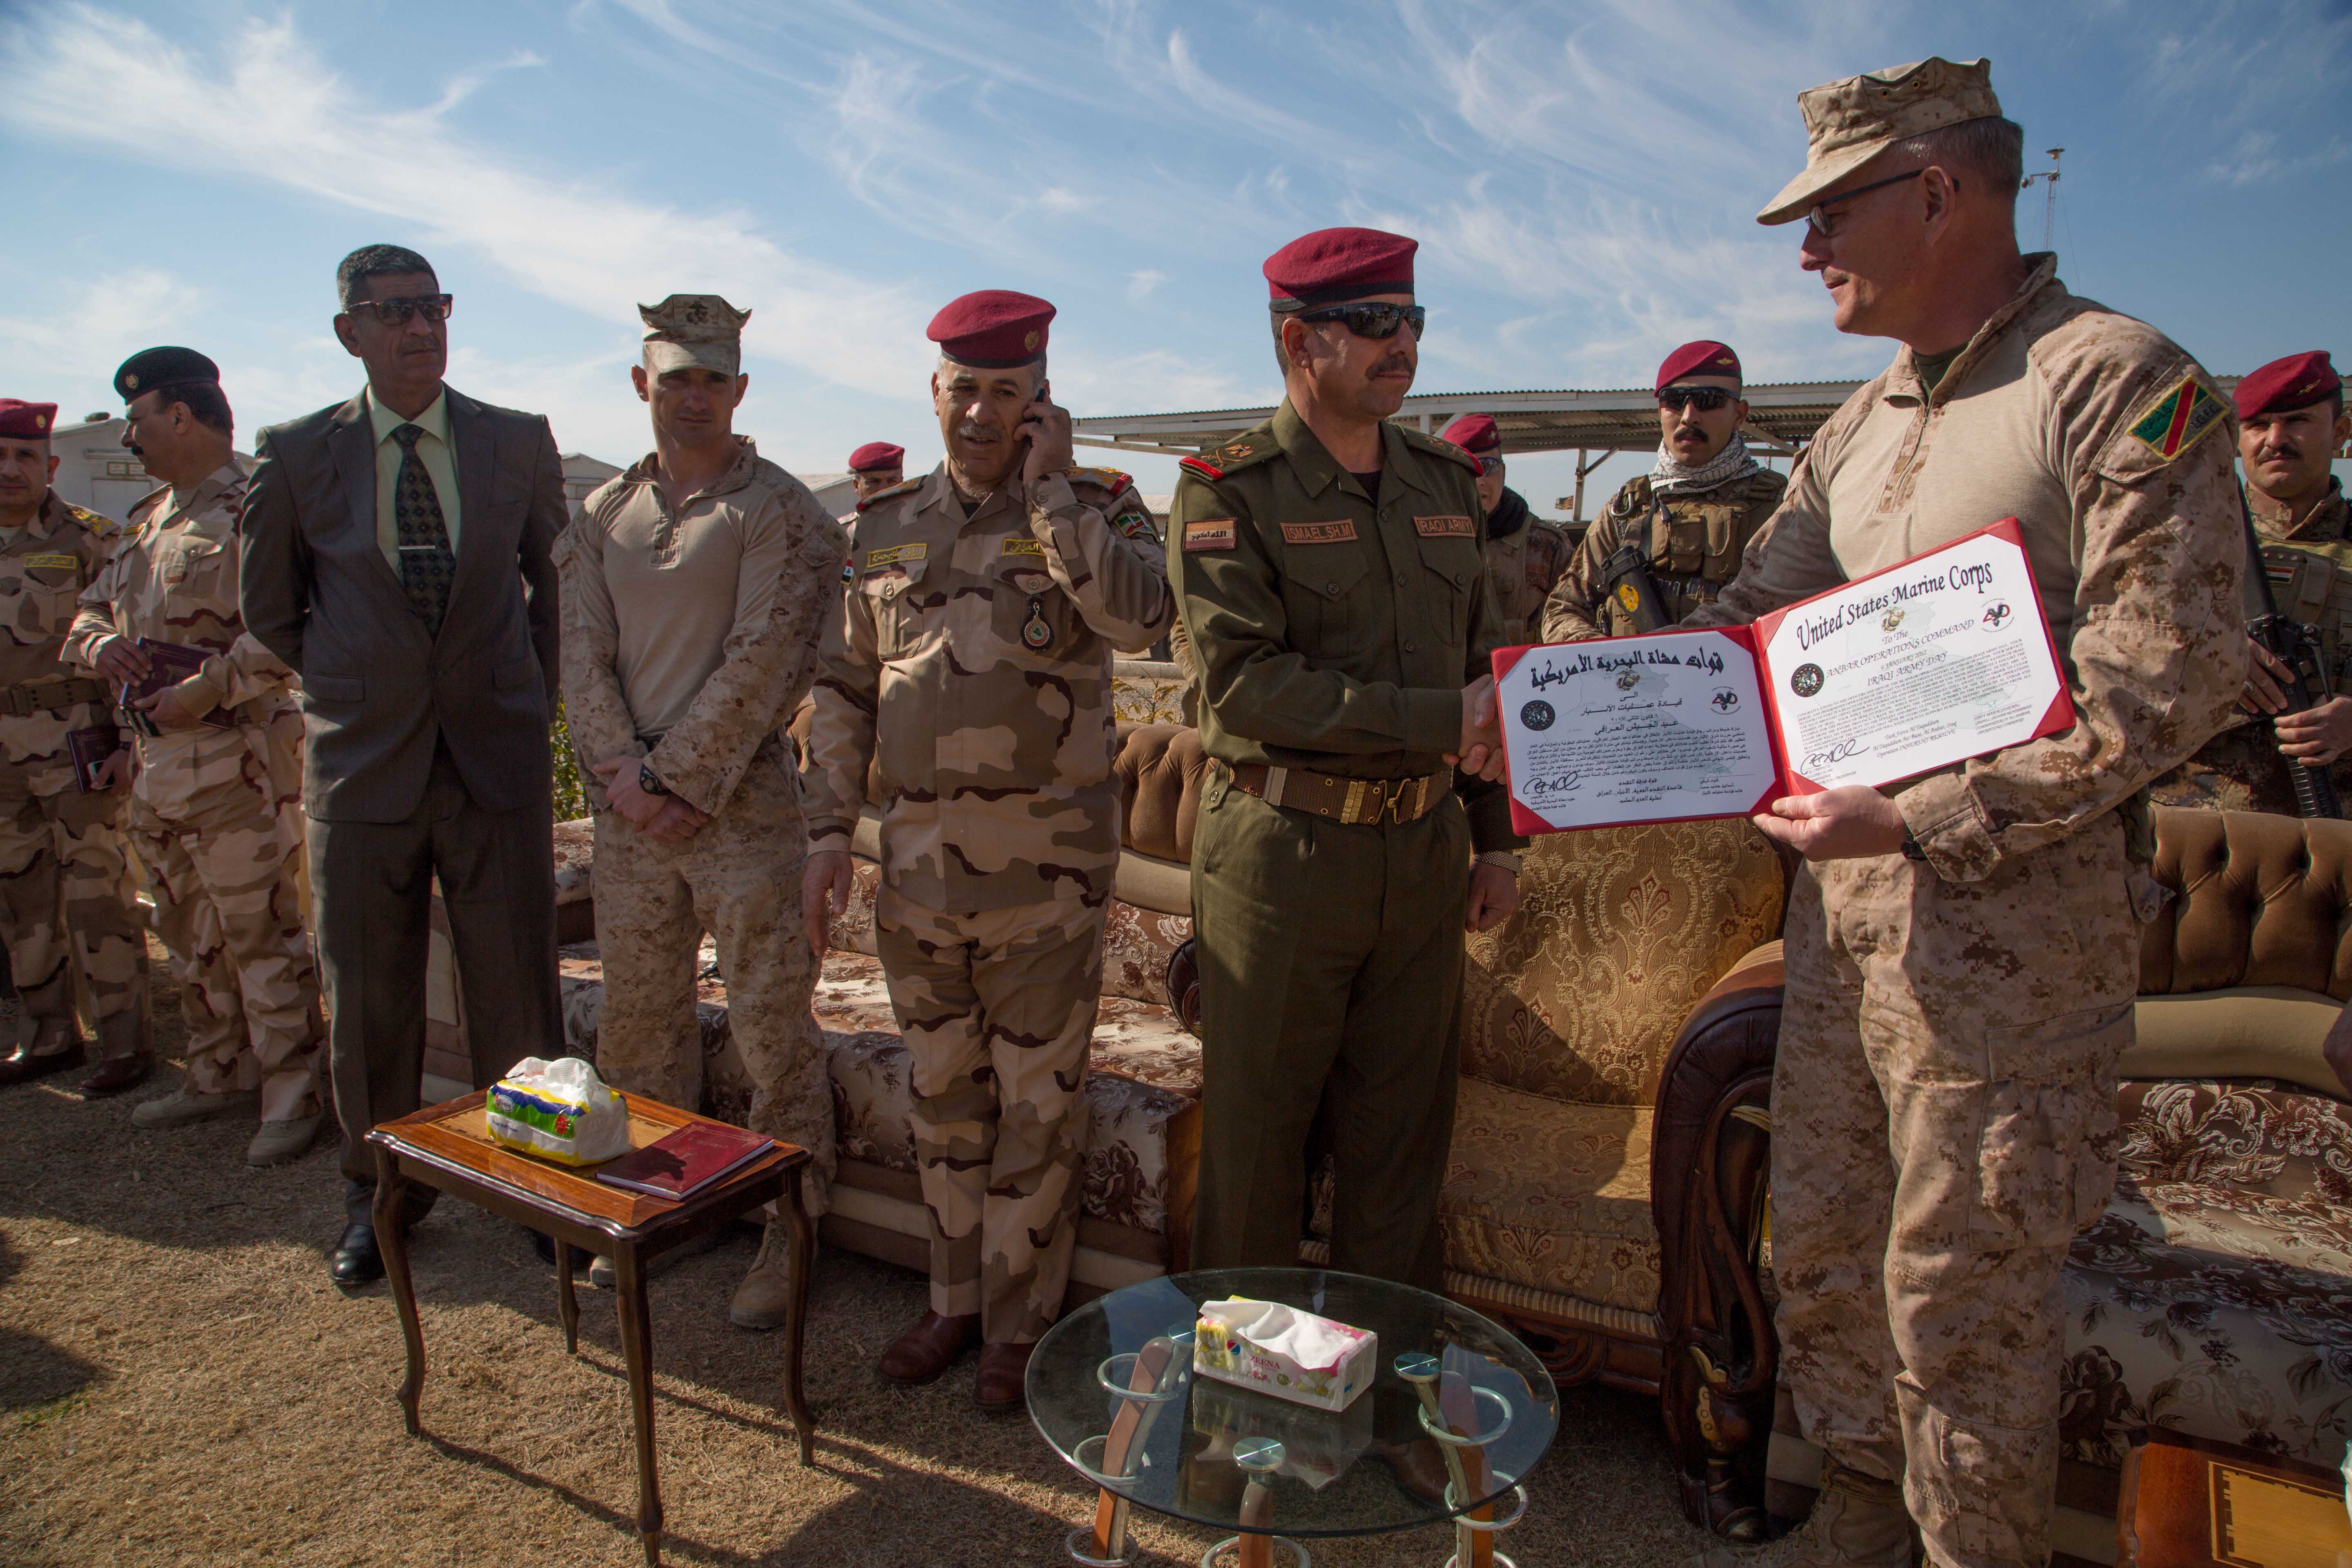 U.S. Marine Corps Col. Christian Cabaniss, Task Force Al-Taqaddum commander, awards an Iraqi security force general with a certificate of appreciation near Camp Manion, Iraq, Jan. 6, 2017. The Marines train Iraqi security forces in support of Combined Joint Task Force – Operation Inherent Resolve, the global Coalition to defeat ISIL in Iraq and Syria. (U.S. Army photo by Spc. Christopher Brecht)